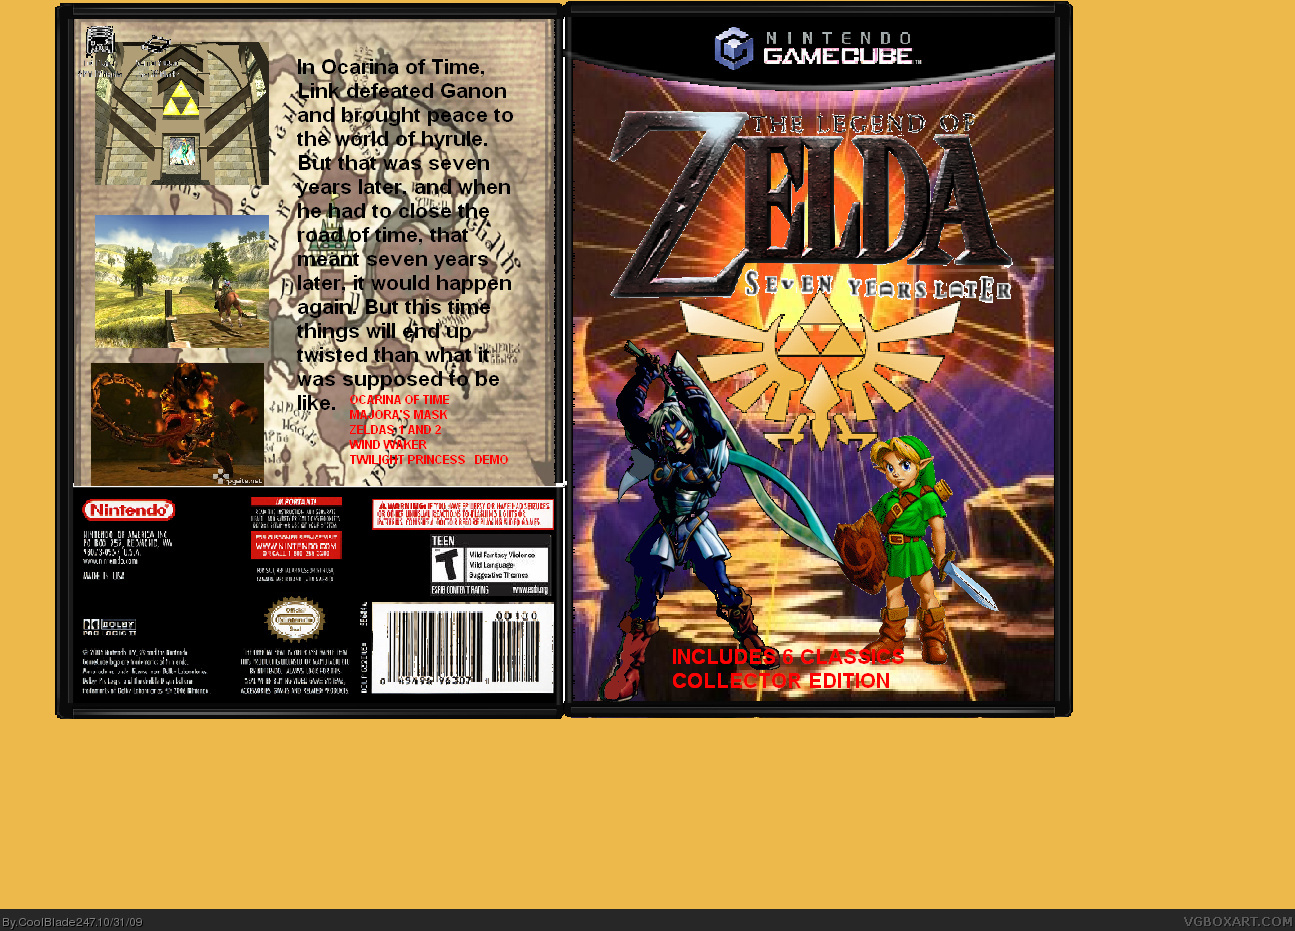 The Legend of Zelda: Seven Years Later box cover